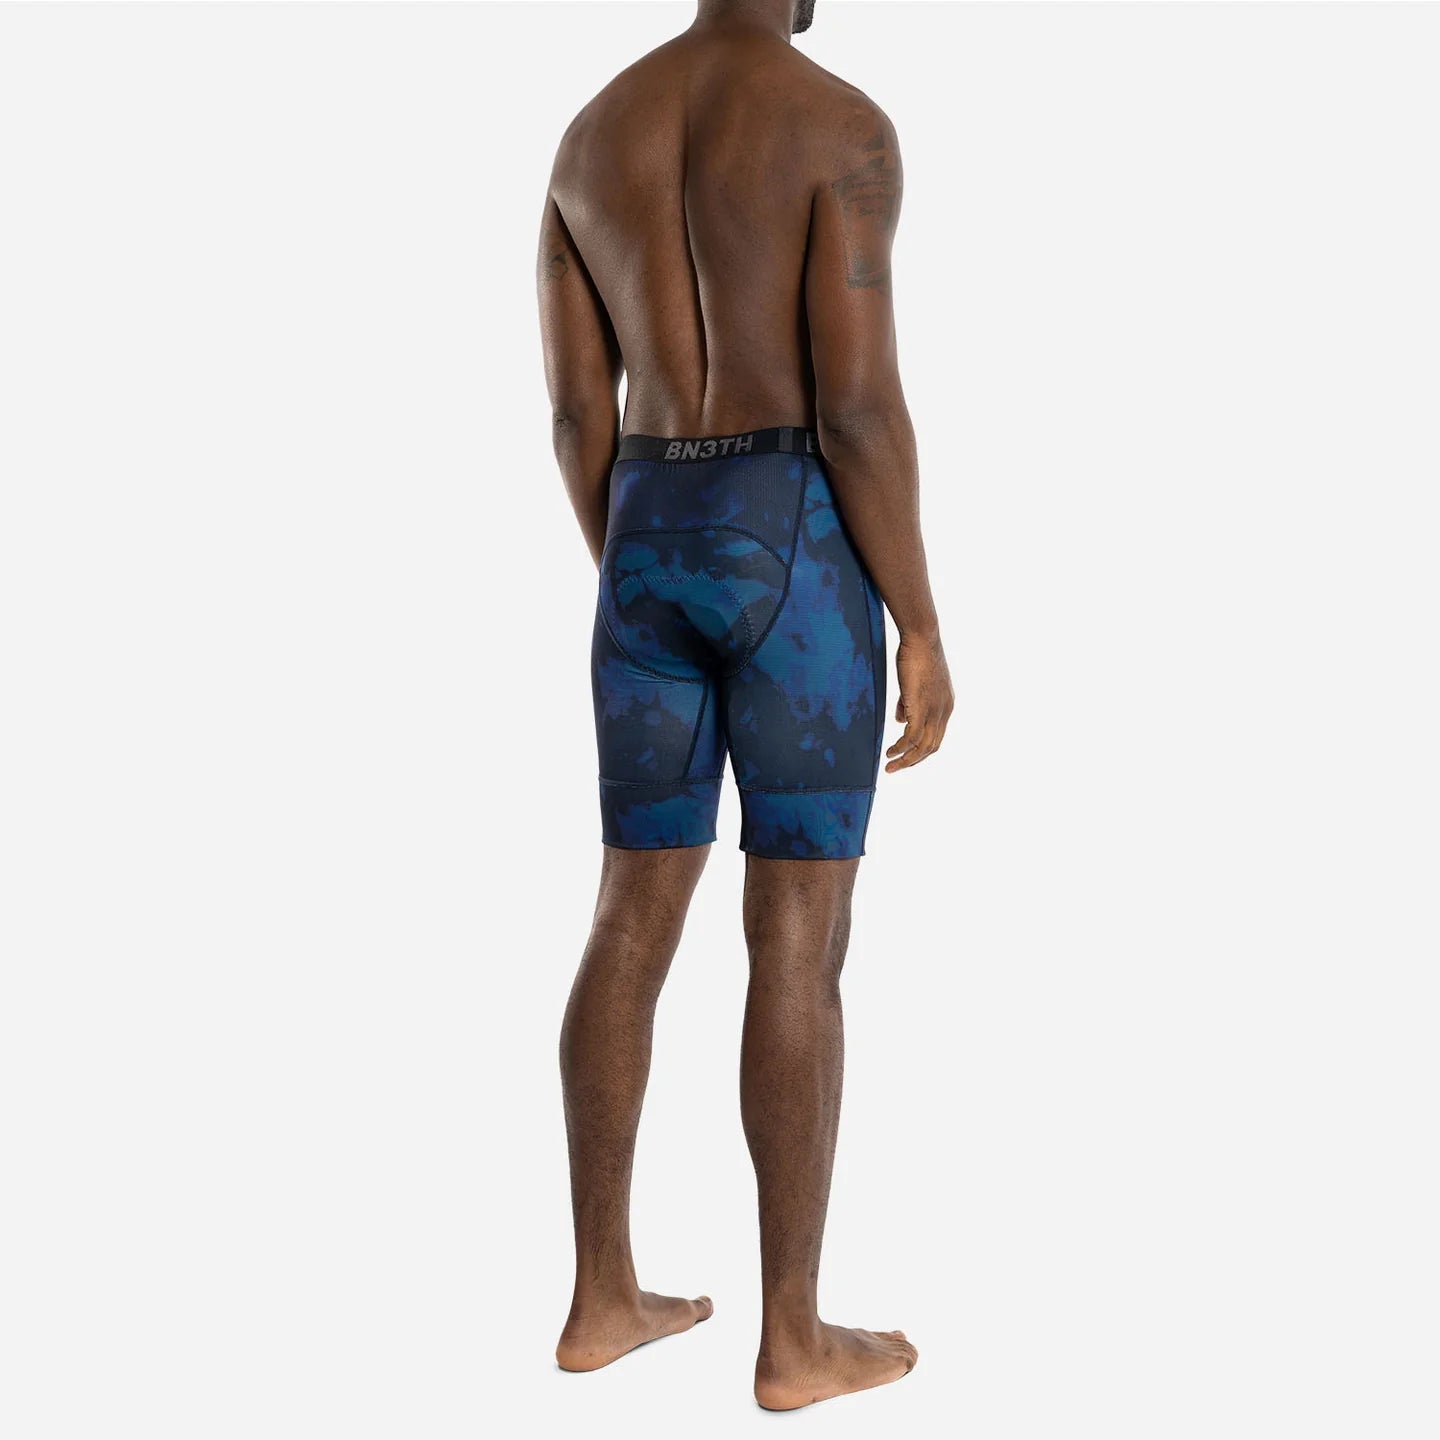 Bn3th - North Shore Chamois Bike Liner Short : Washed Out Navy